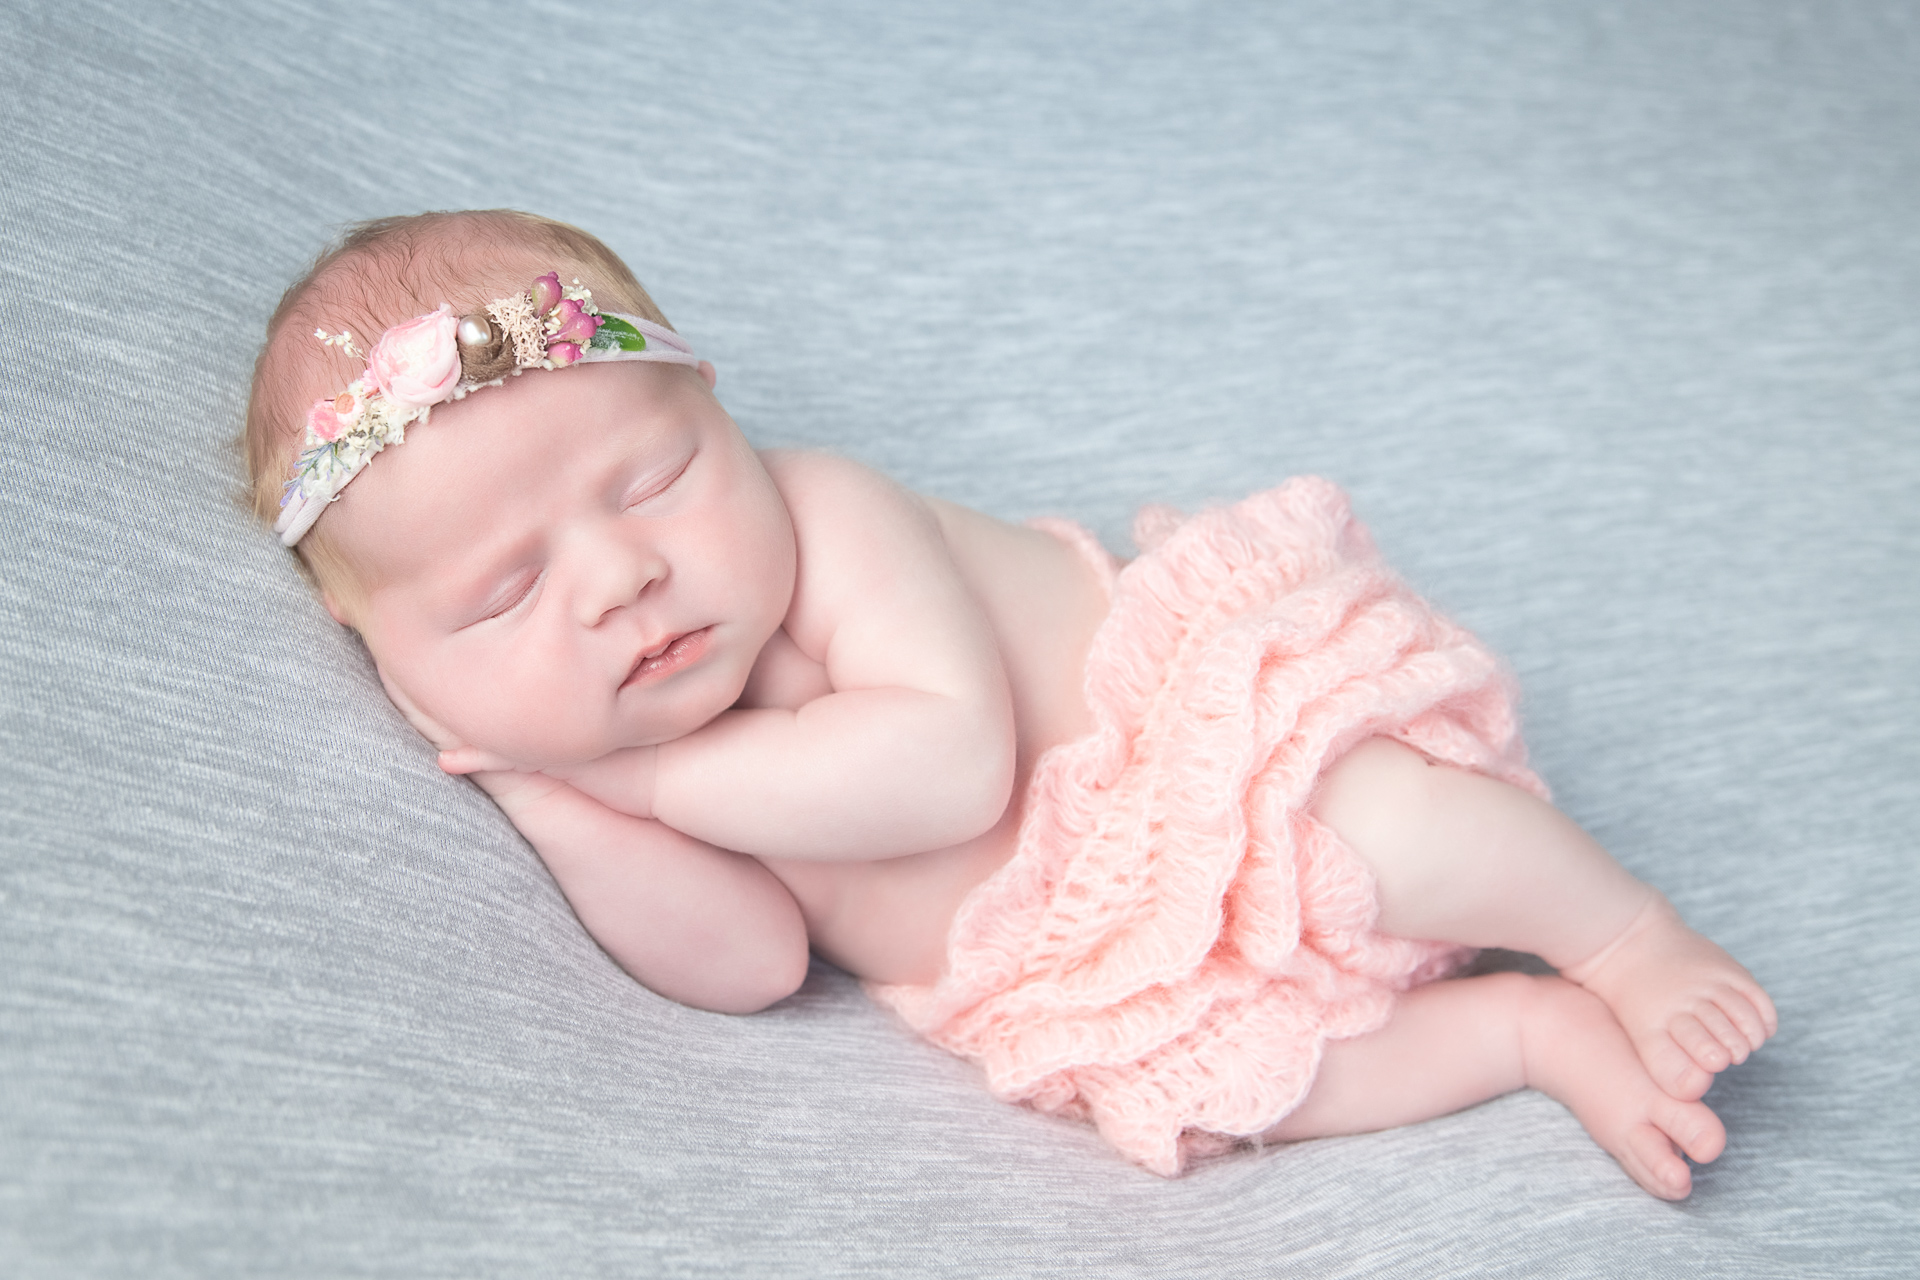 Newborn sleeps while wearing pink outfit and pink headband on light gray backdrop.